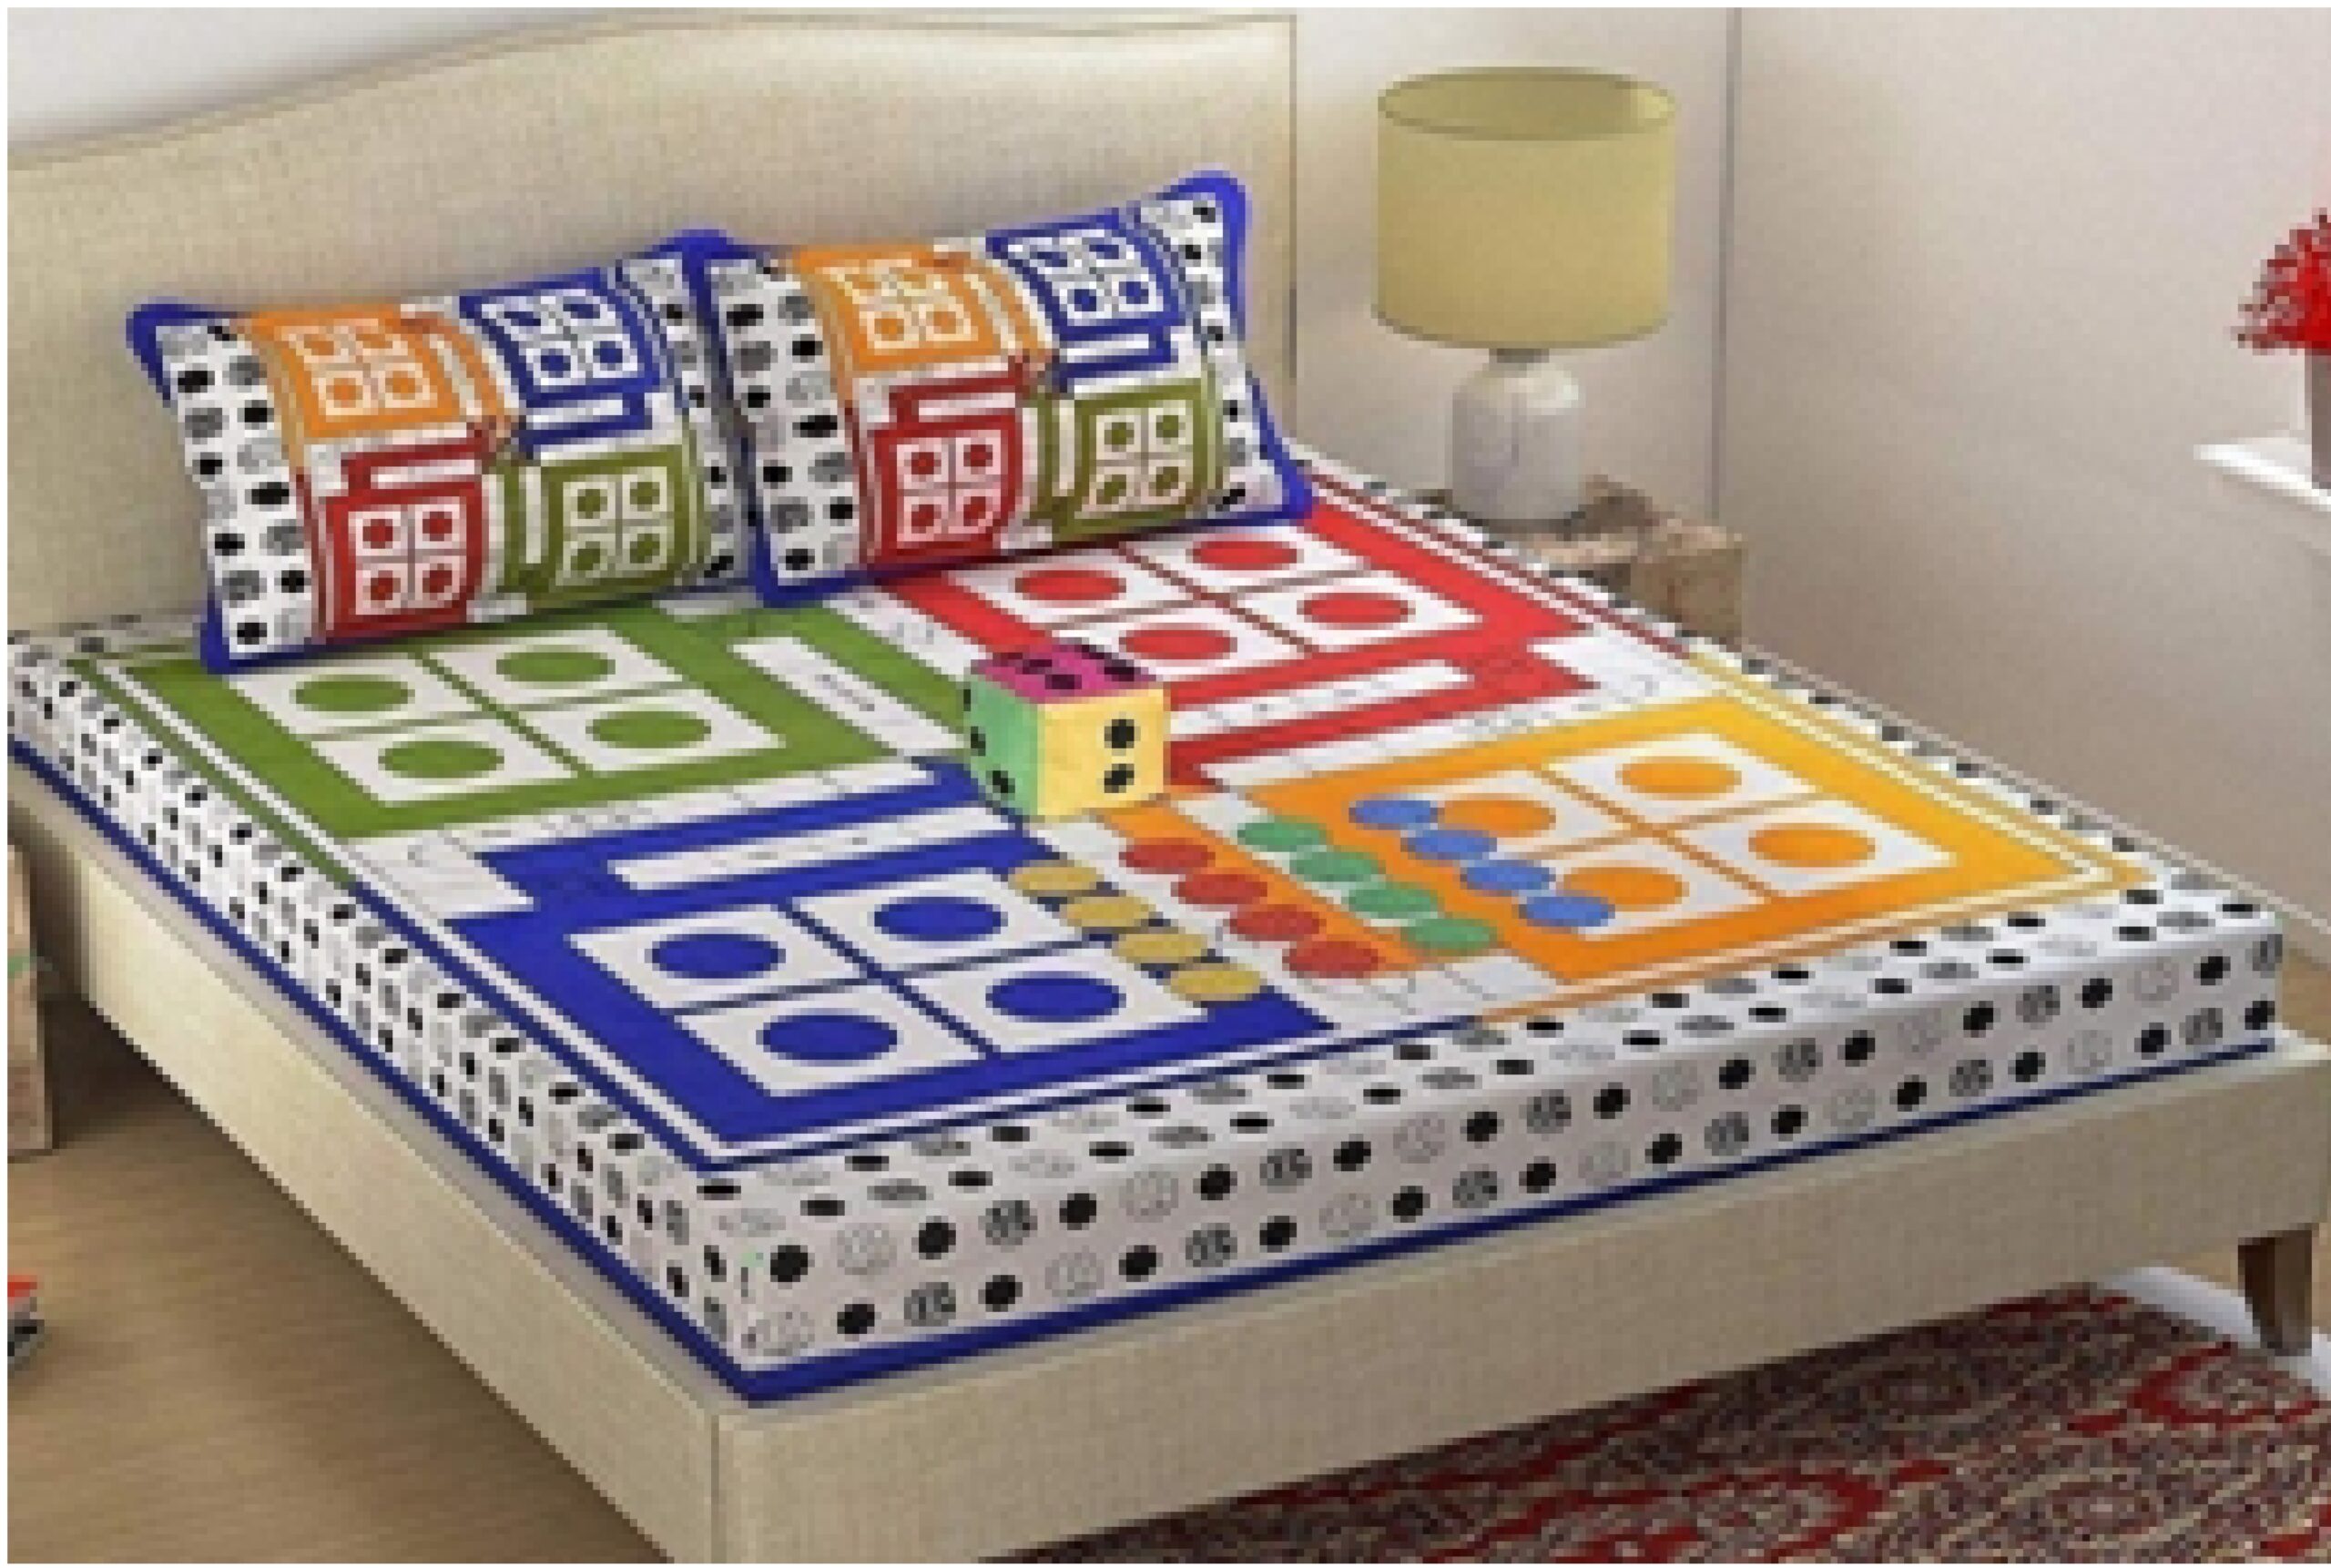 Ludo Bedsheet with Dice and Gotii